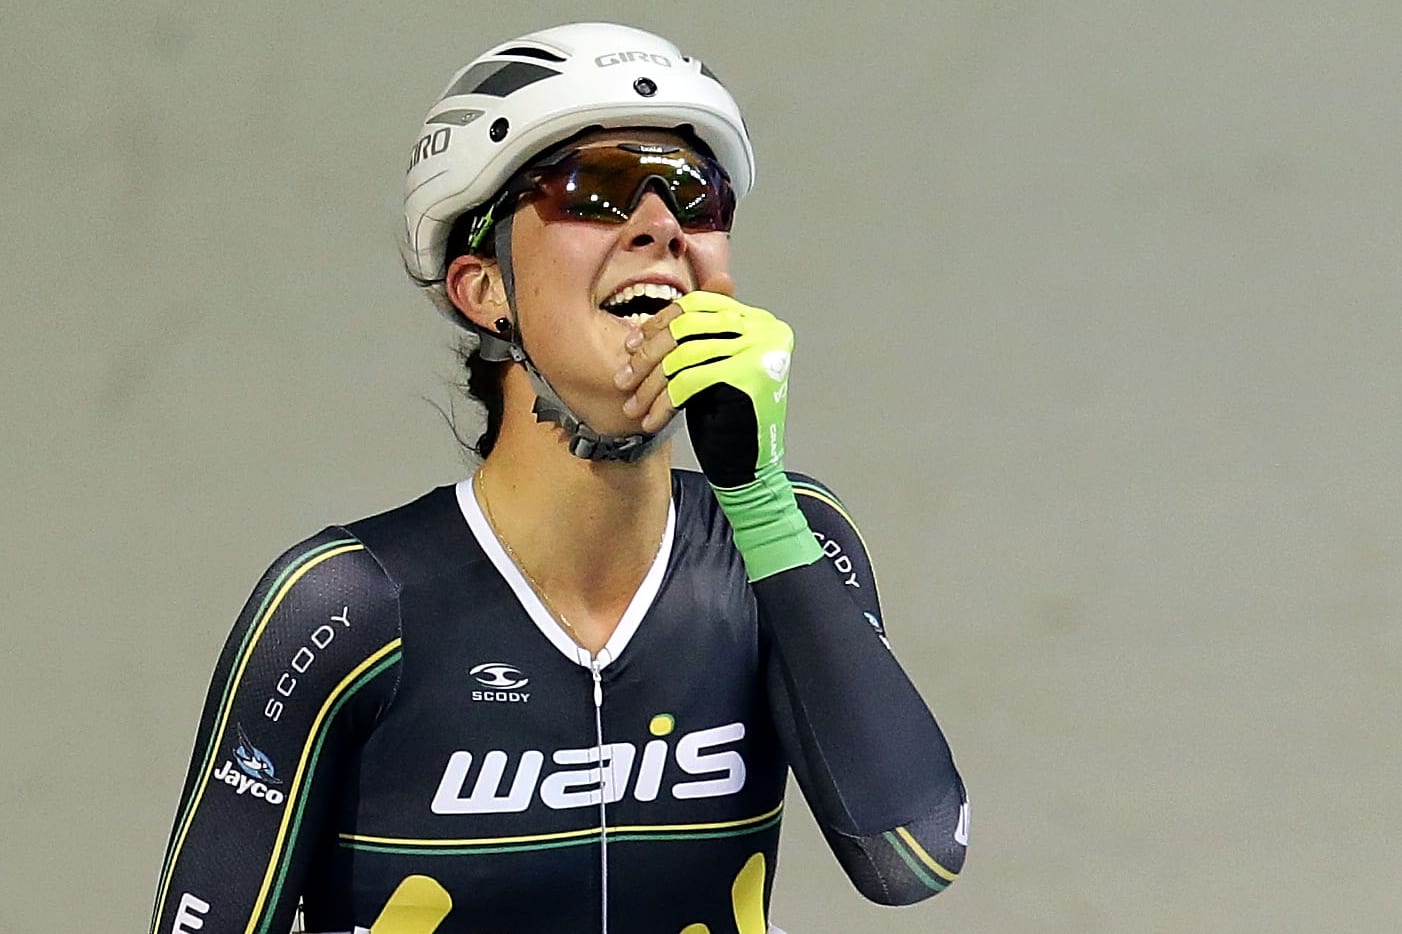 Australian cyclist Melissa Hoskins has reportedly died at the age of 32 after being hit by a car